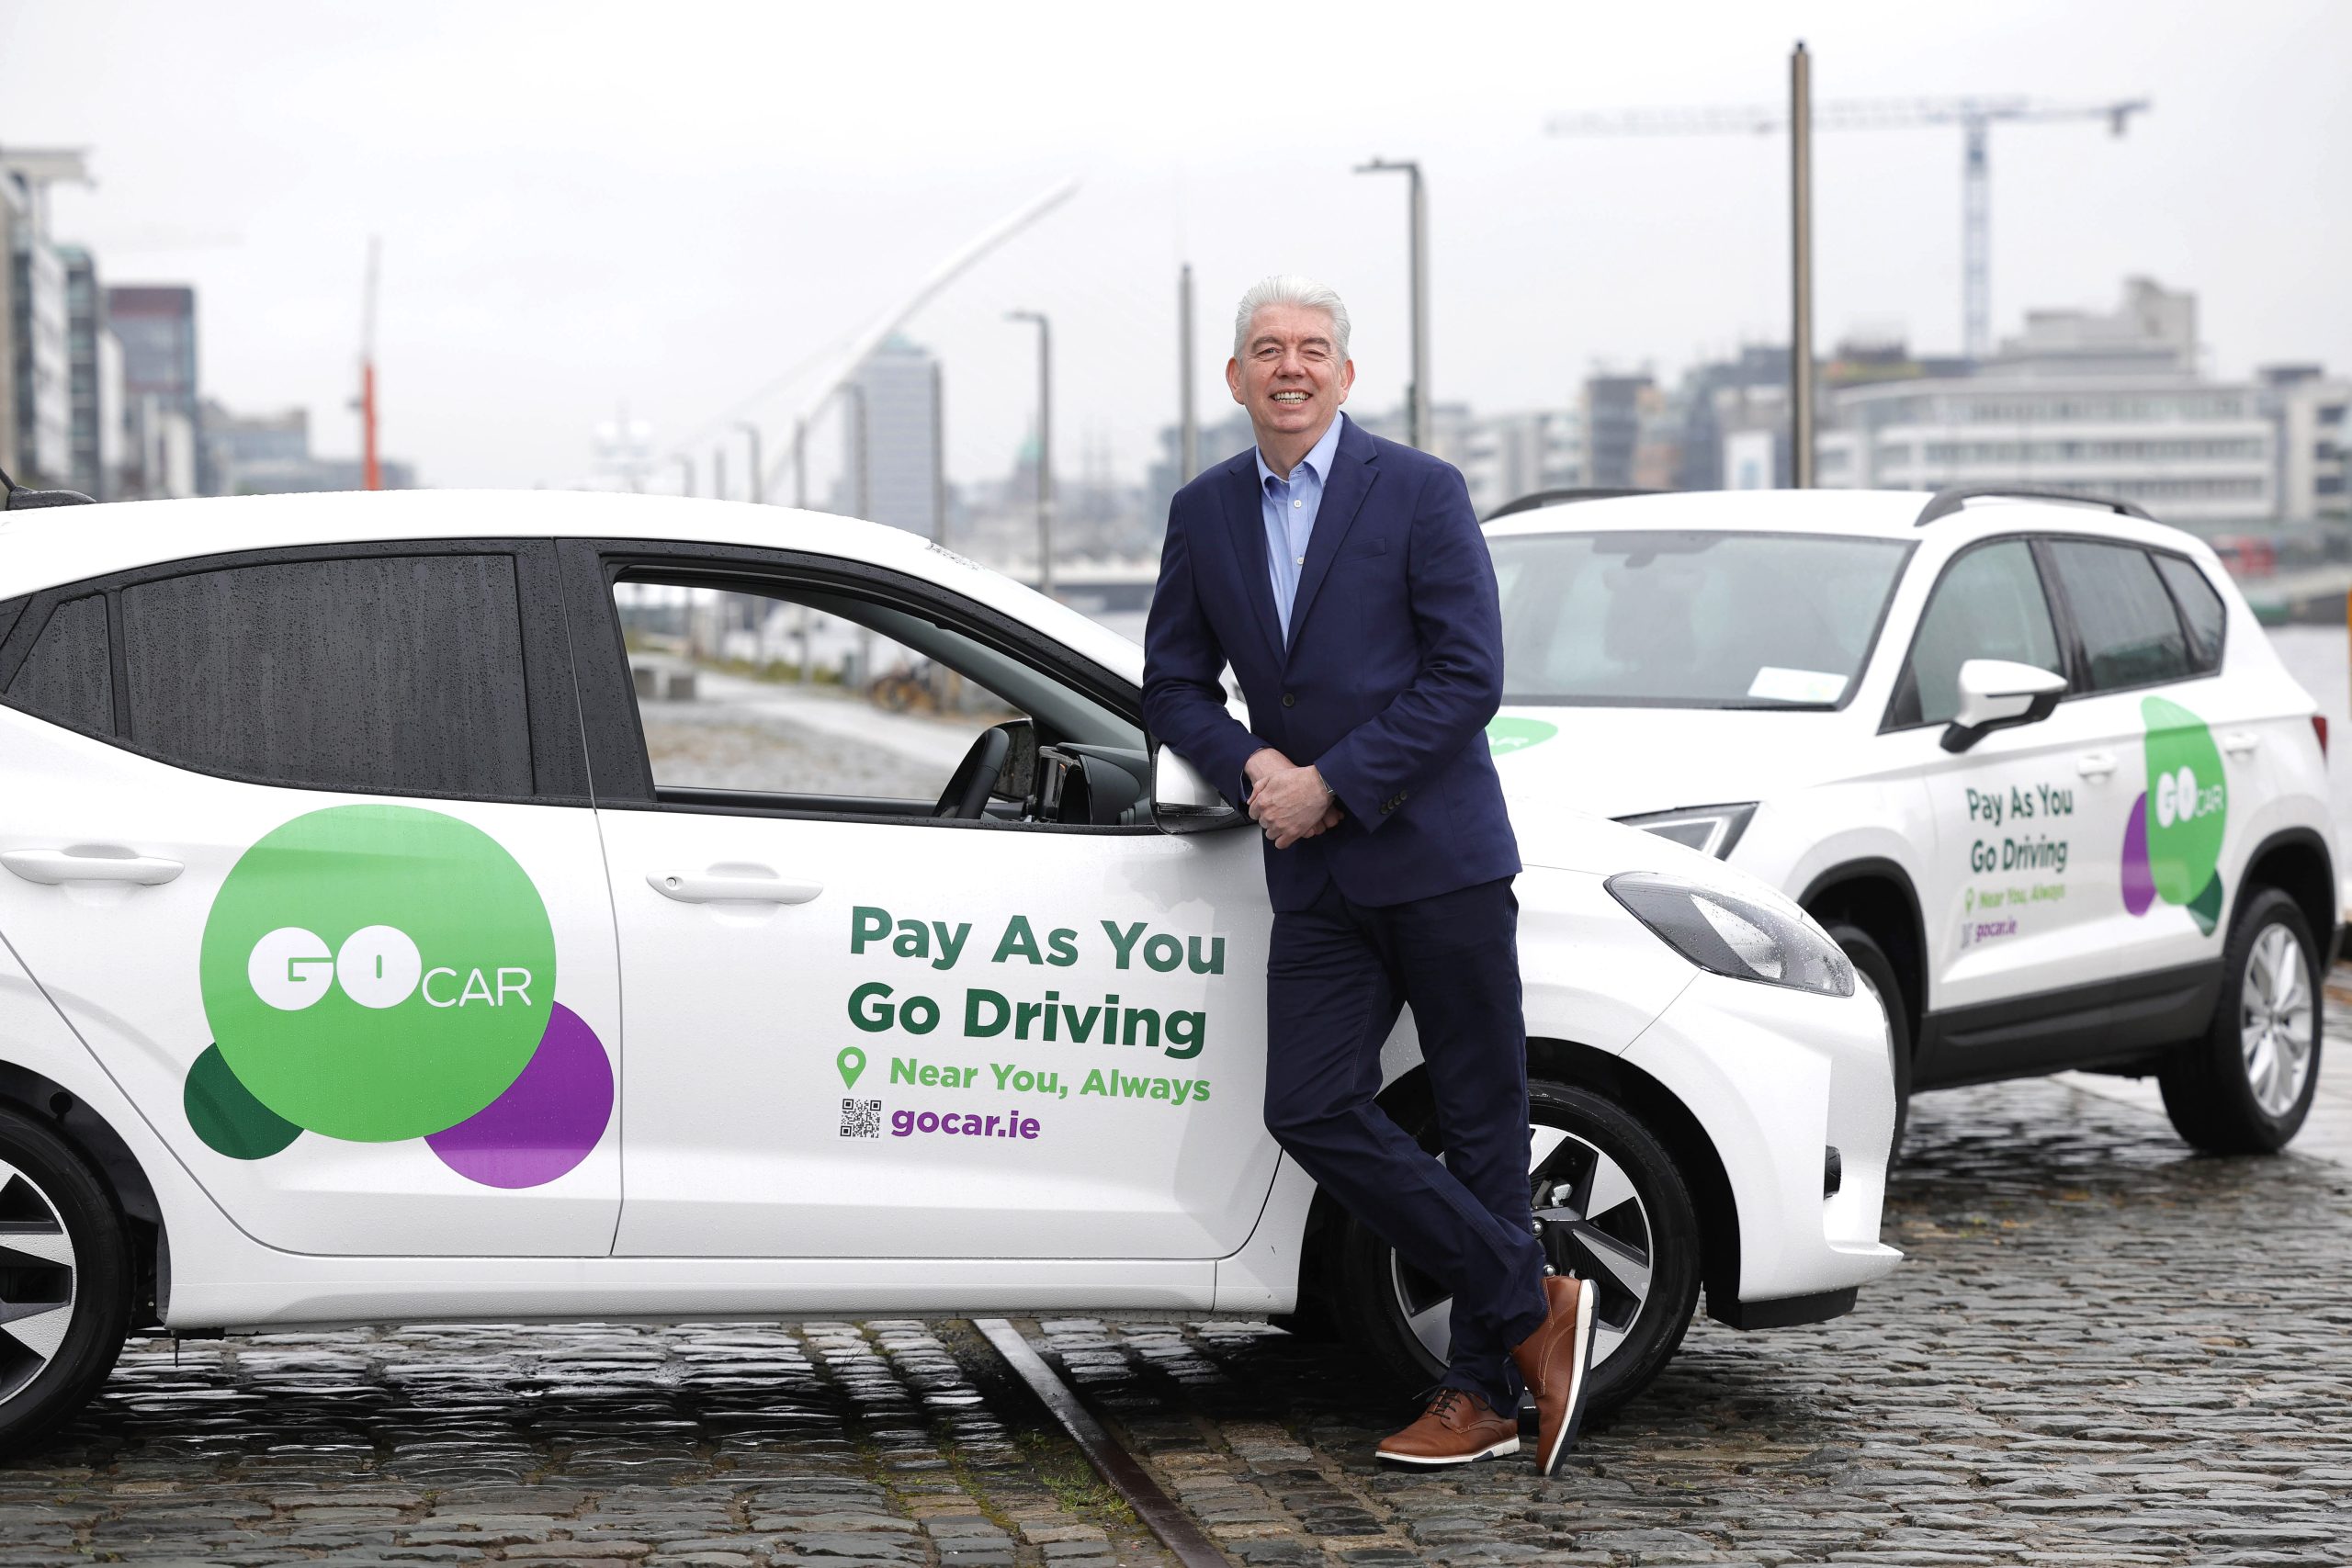 GoCar Announces €10 Million Investment to Expand and Upgrade Car Sharing Fleet 